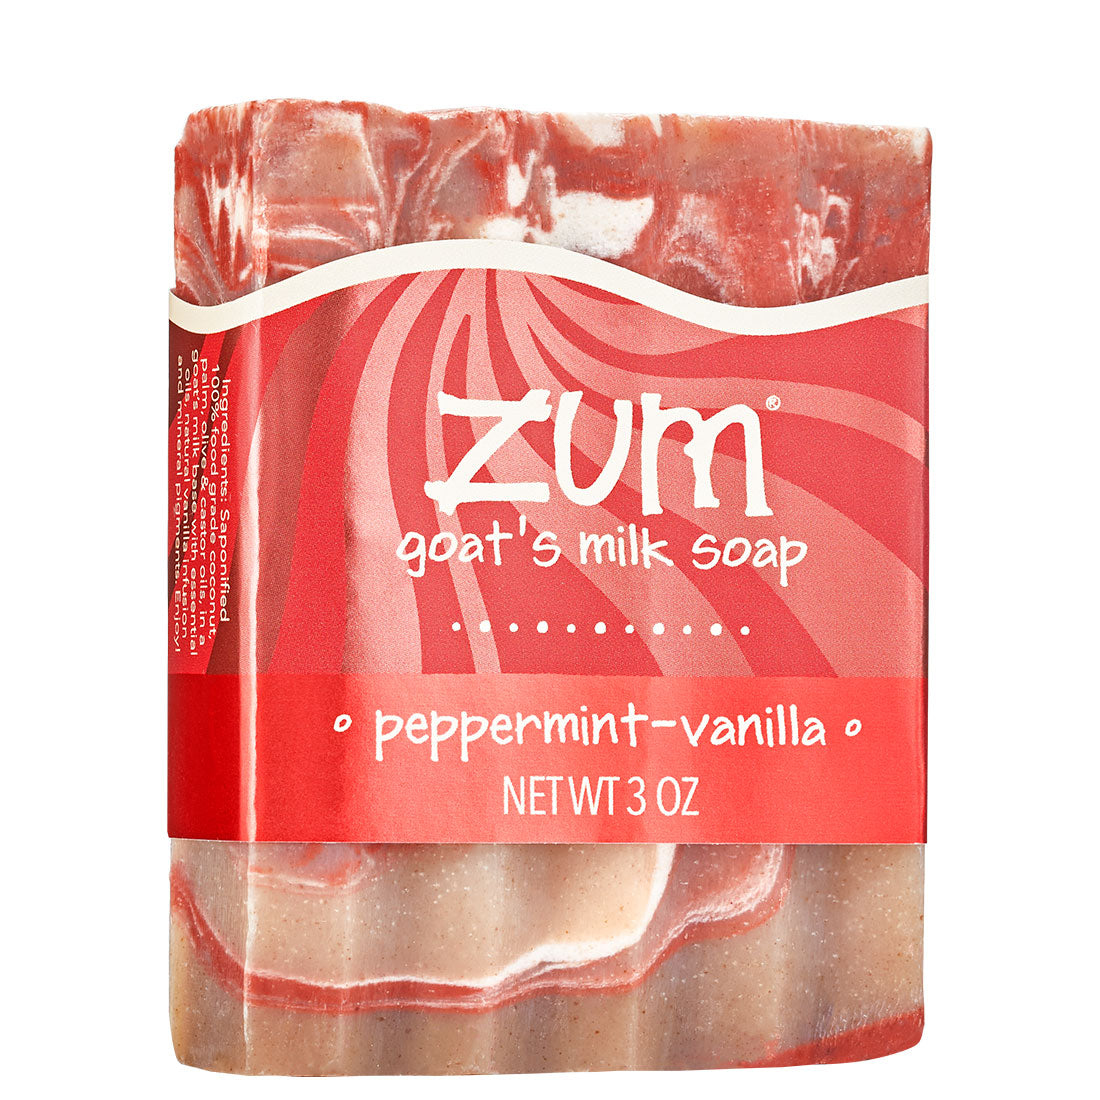 Red and white swirled Zum Bar with red peppermint-vanilla label wrapped around.